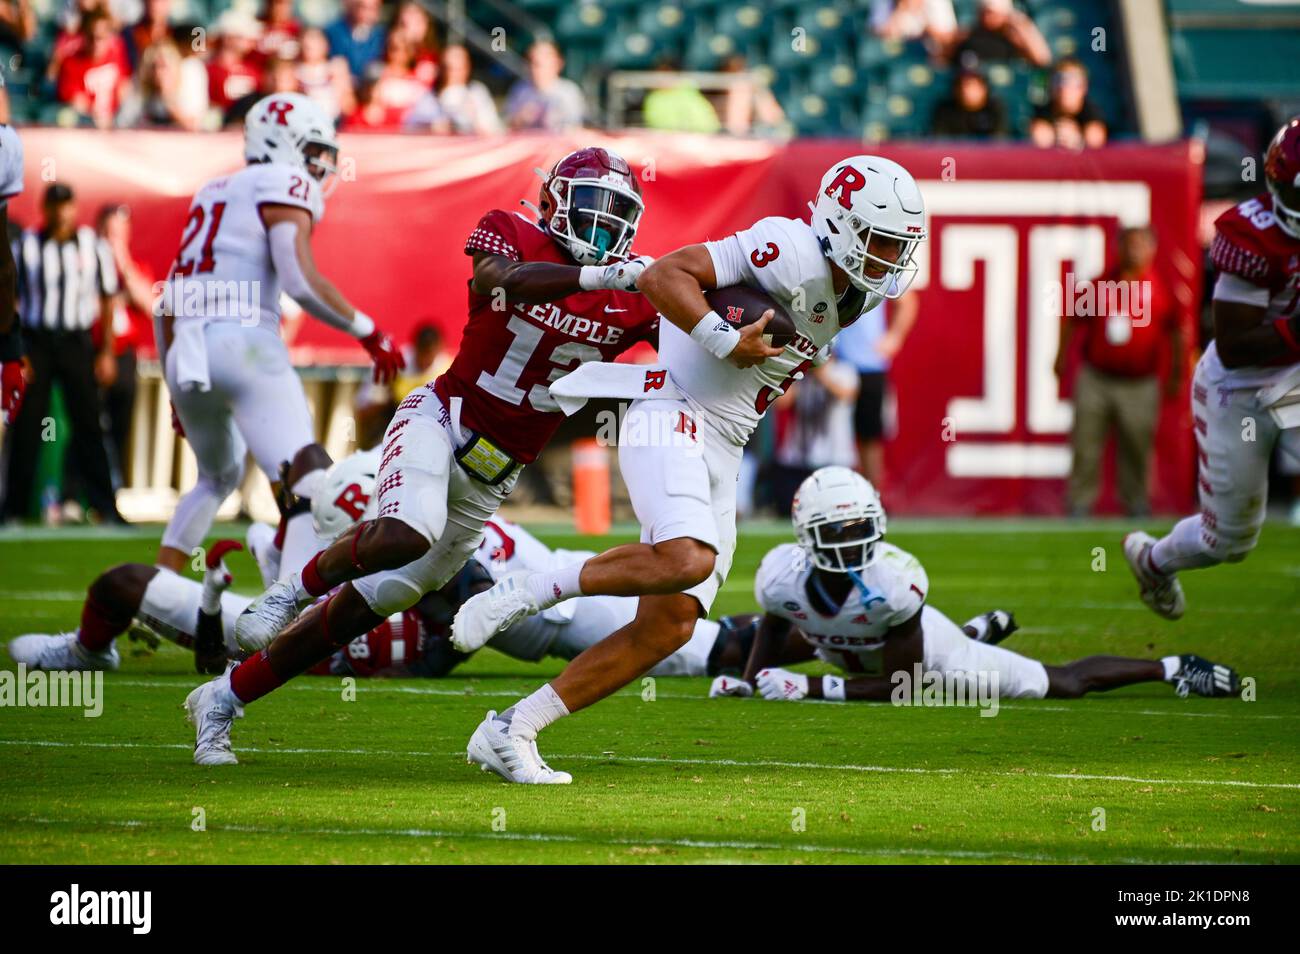 Philadelphia, Pennsylvania, USA. 17th Sep, 2022. September 17, 2022, Philadelphia PA- Rutgers football player EVAN SIMON (3) in action during the game at Lincoln Financial Field in Philadelphia Pa (Credit Image: © Ricky Fitchett/ZUMA Press Wire) Stock Photo